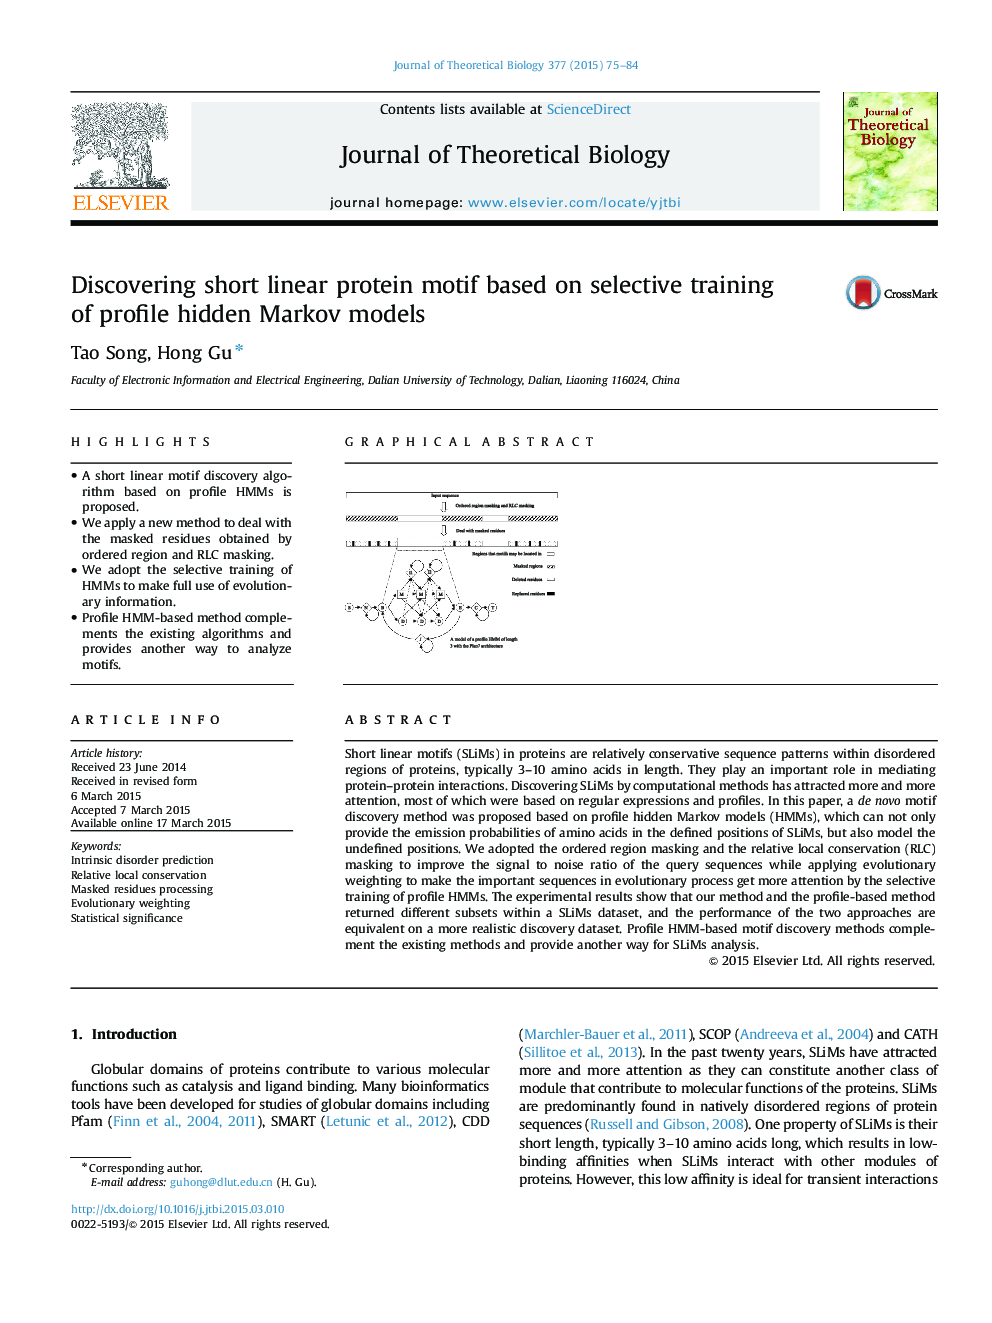 Discovering short linear protein motif based on selective training of profile hidden Markov models